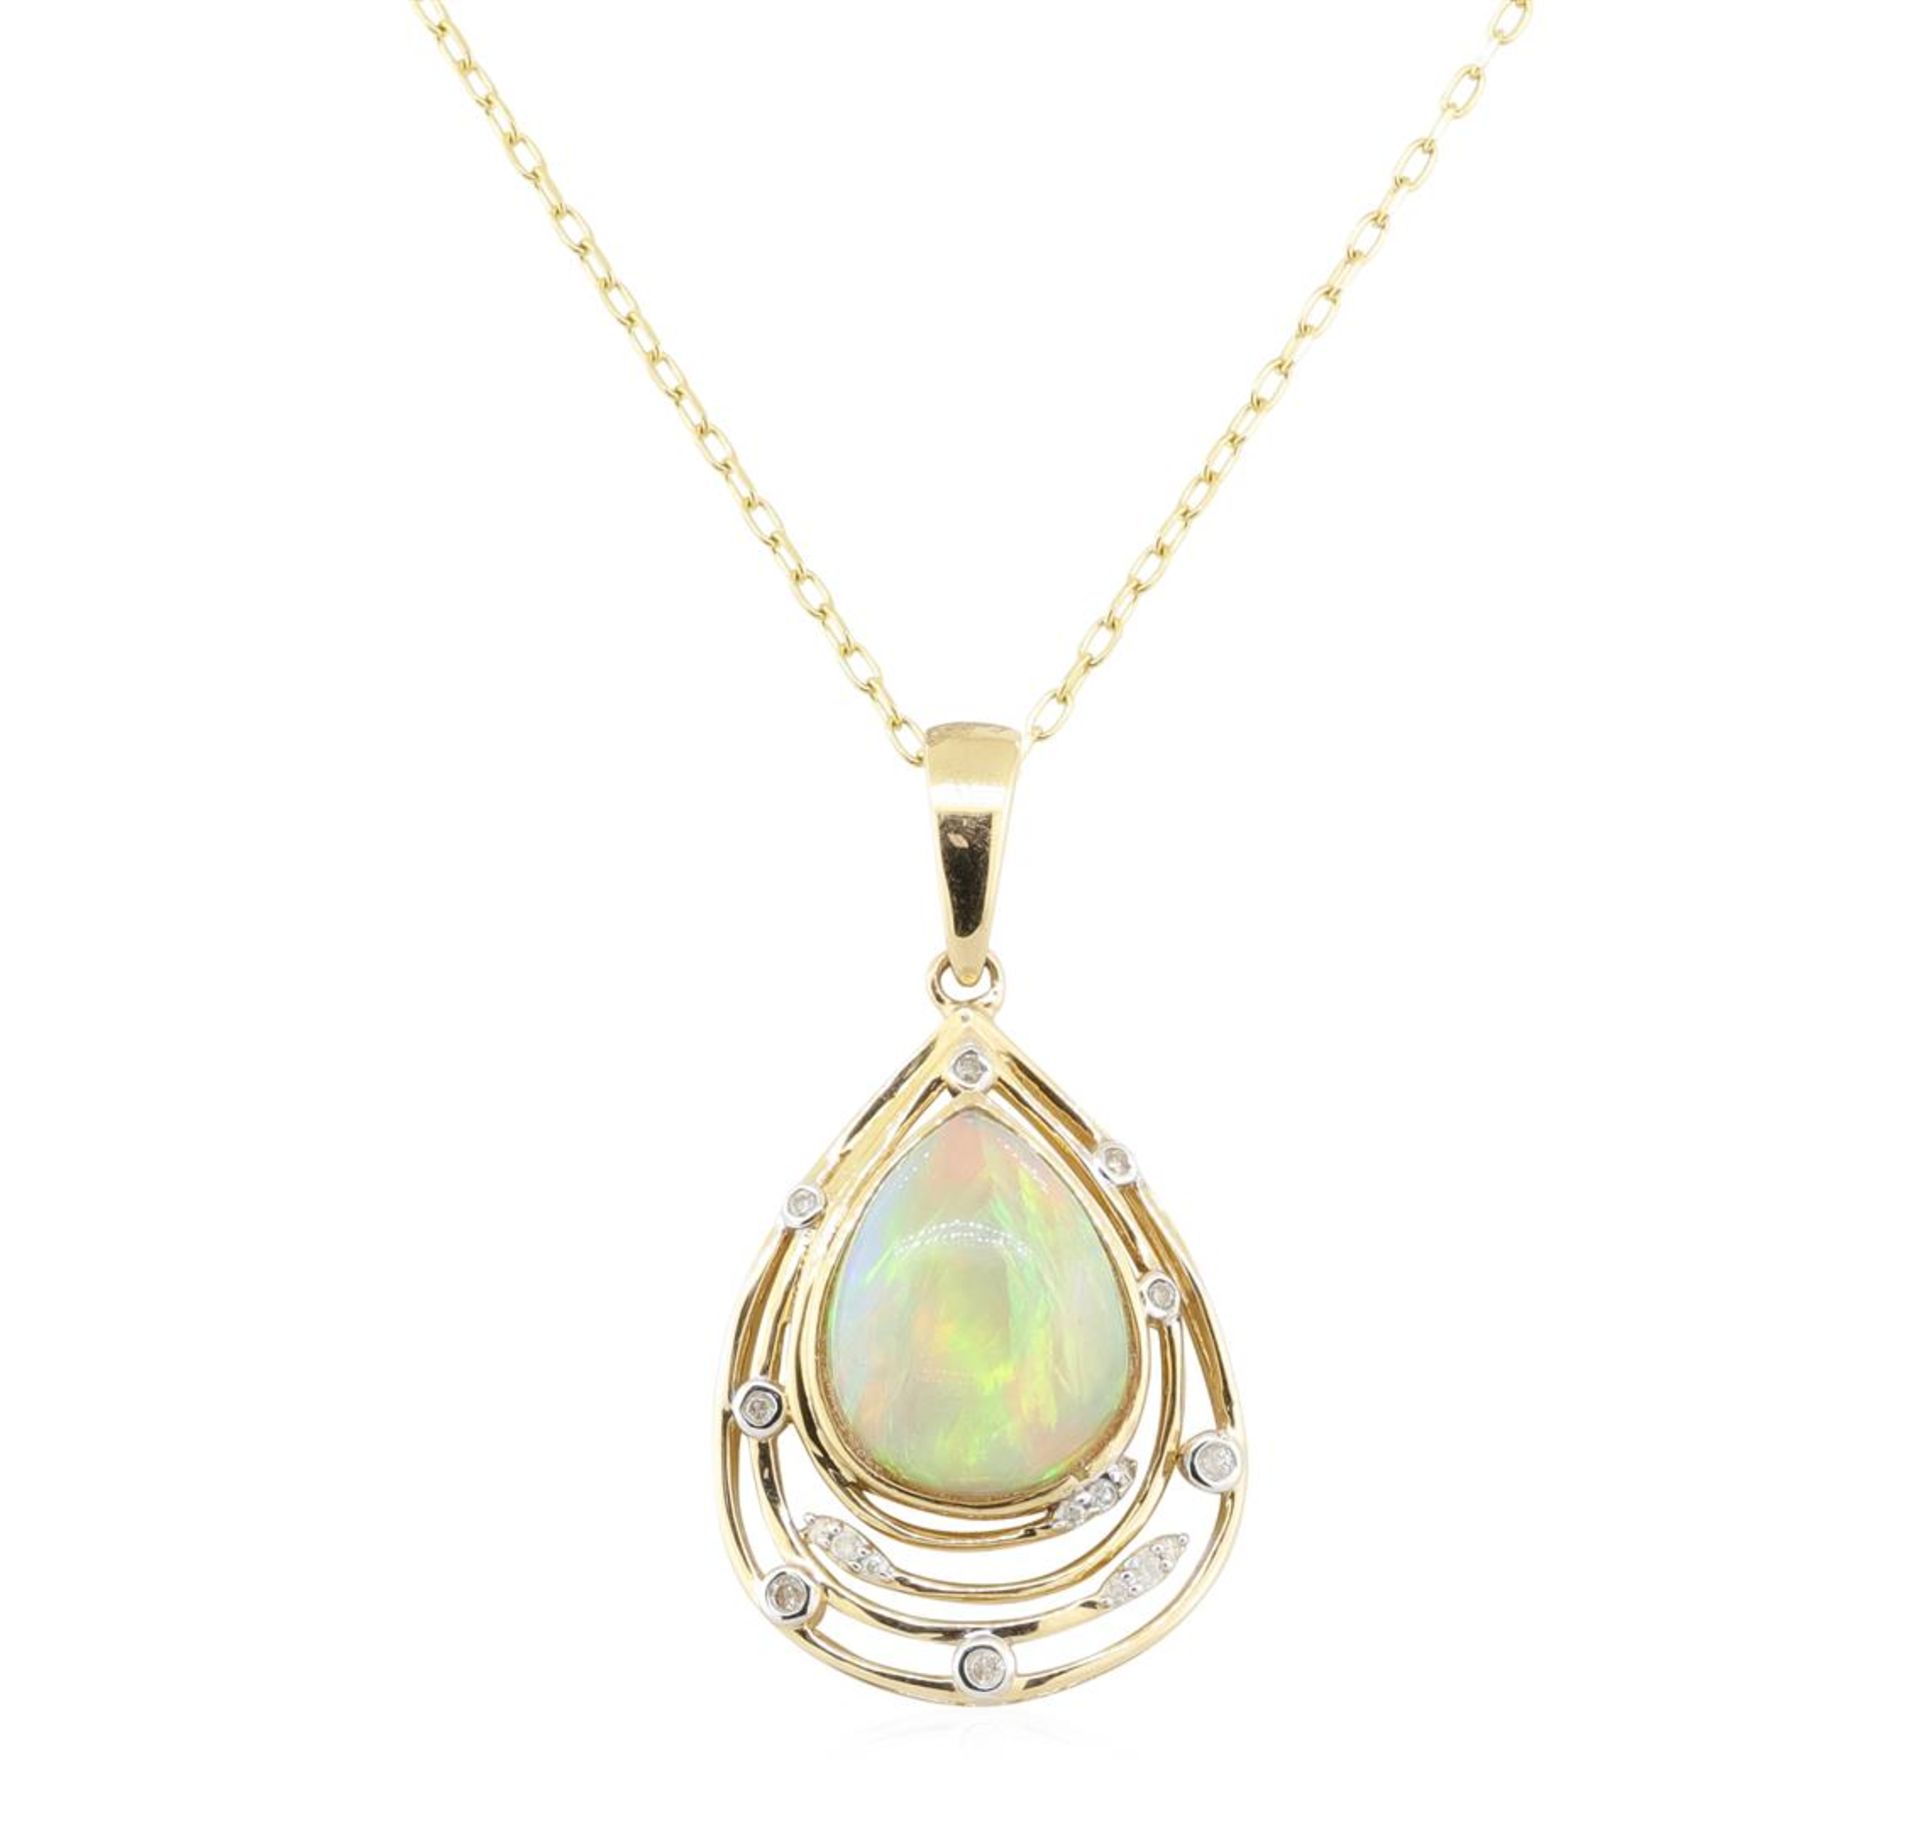 5.59ct Opal and Diamond Pendant - 14KT Yellow Gold - Image 2 of 2